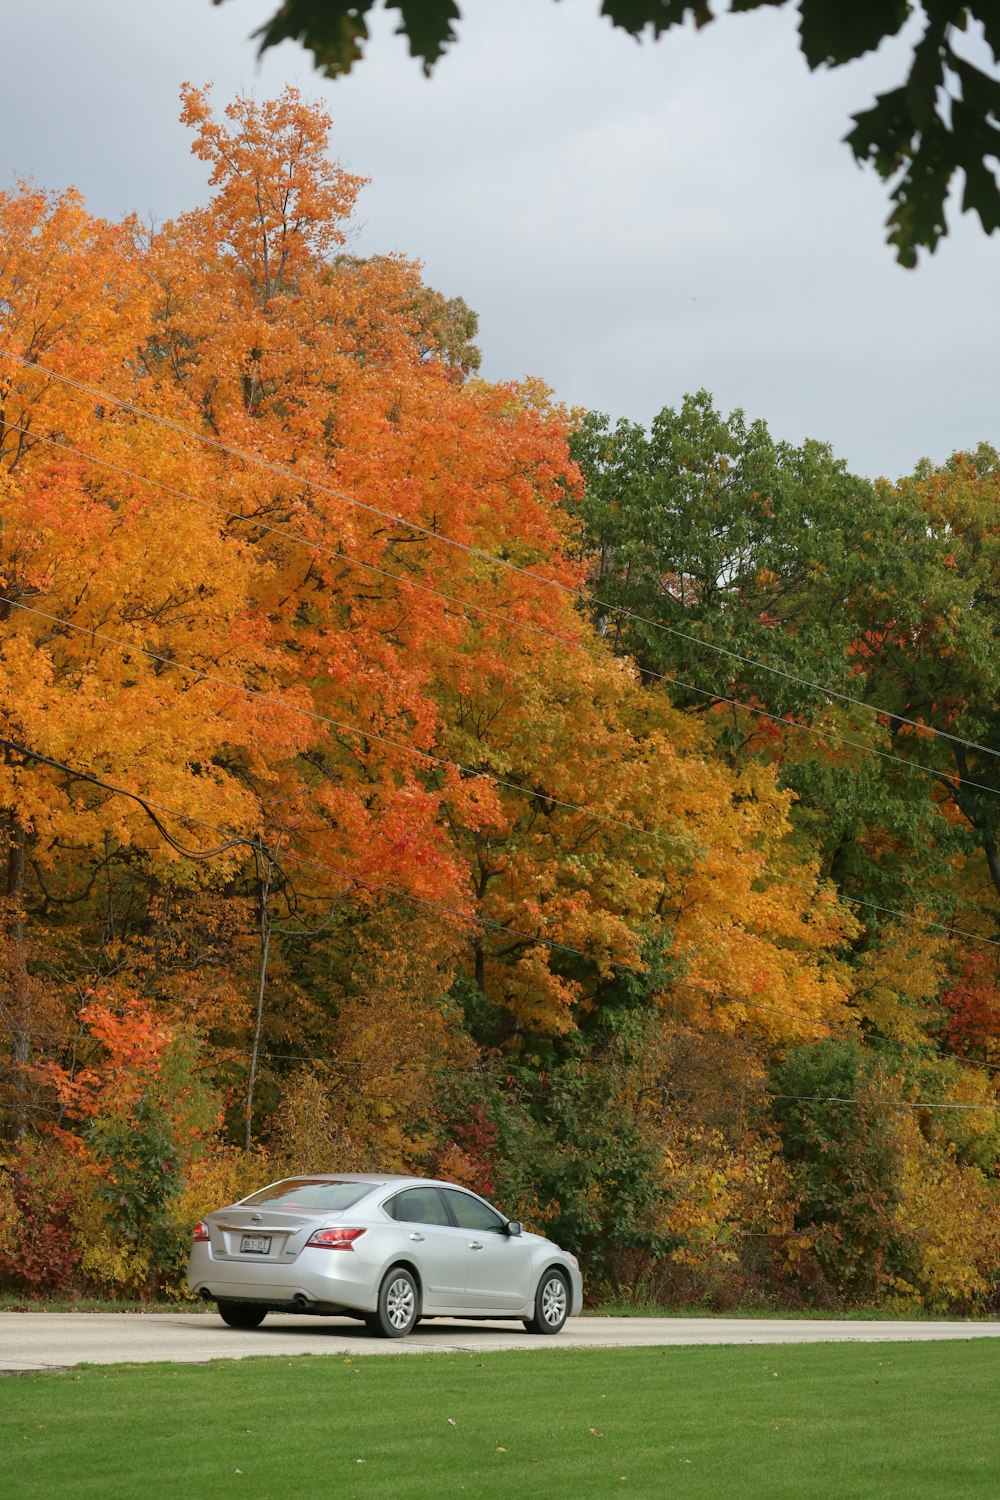 a car parked in front of a tree with orange and yellow leaves